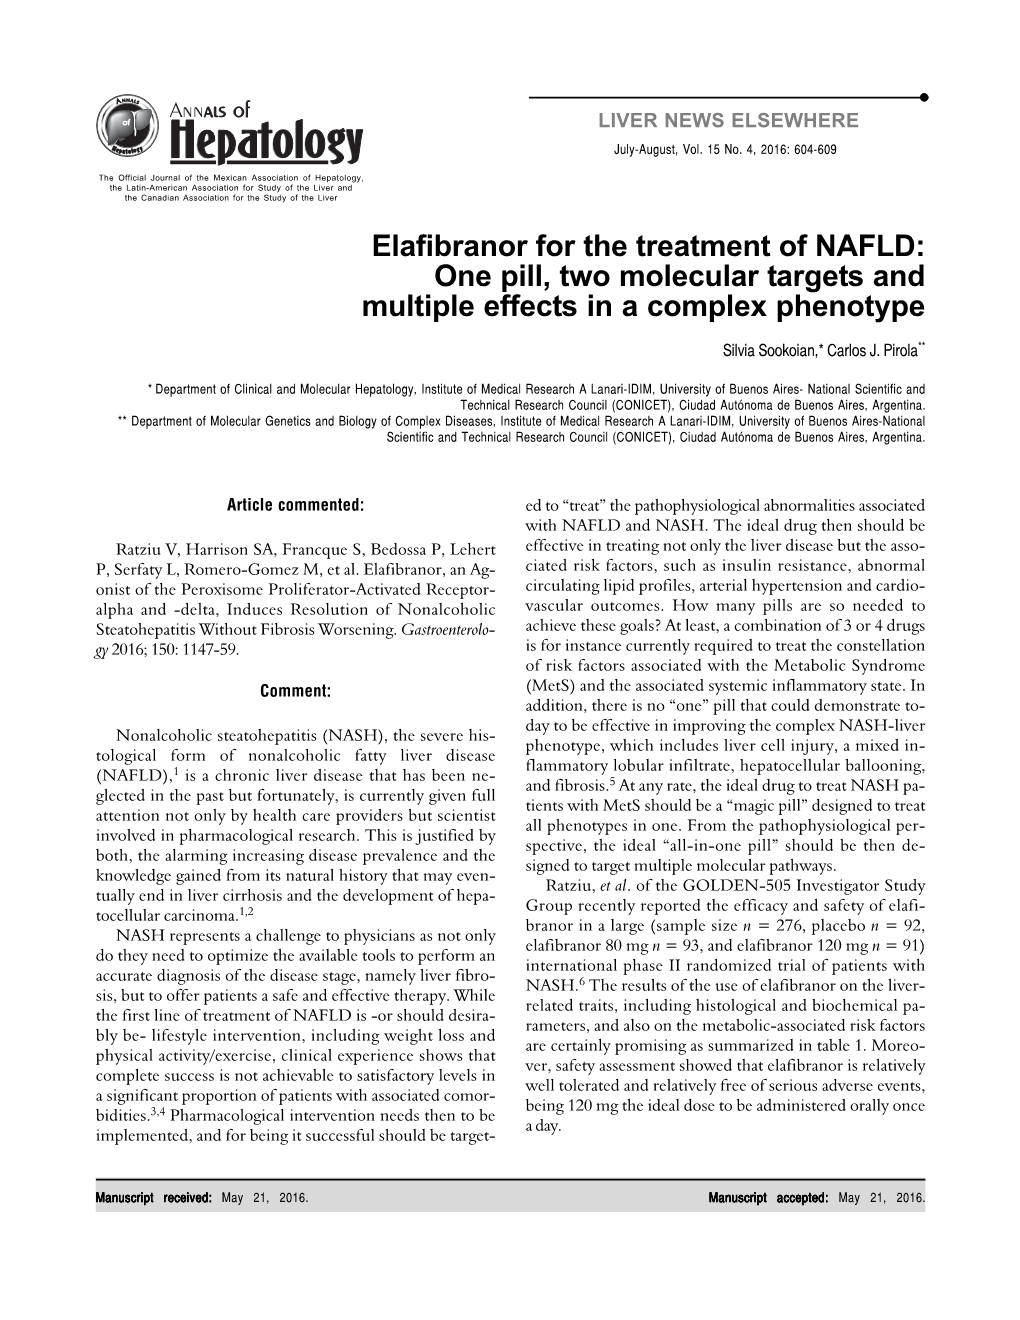 Elafibranor for the Treatment of NAFLD: One Pill, Two Molecular Targets and Multiple Effects in a Complex Phenotype